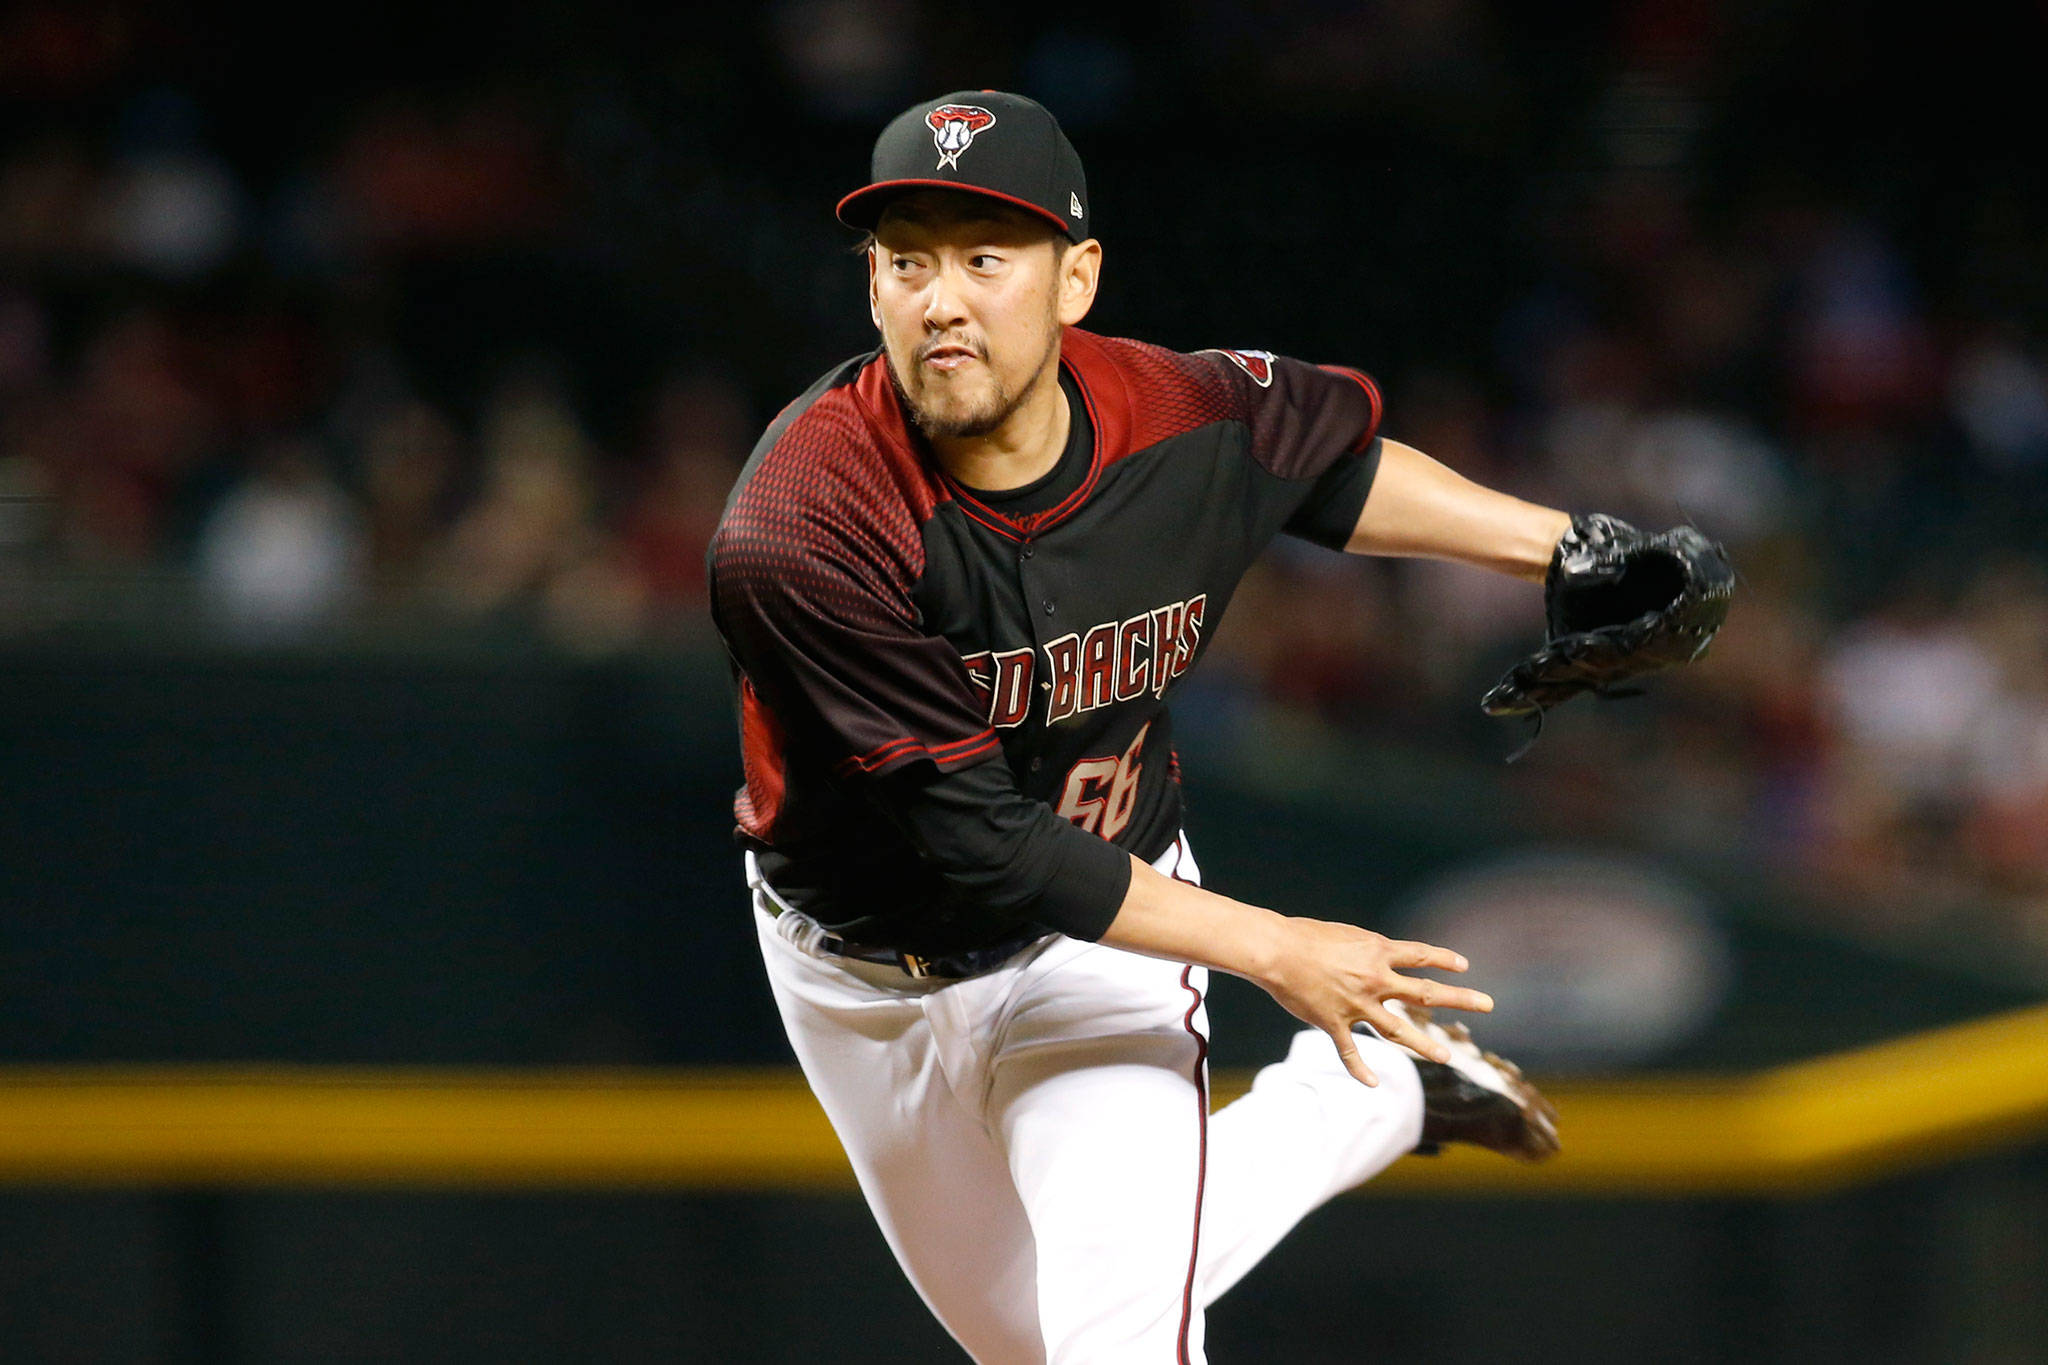 Relief pitcher Yoshihisa Hirano throws for the Diamondbacks during a game against the Padres on Sept. 28, 2019, in Phoenix. Hirano signed a one-year deal with the Mariners on Thursday. (AP Photo/Ralph Freso)